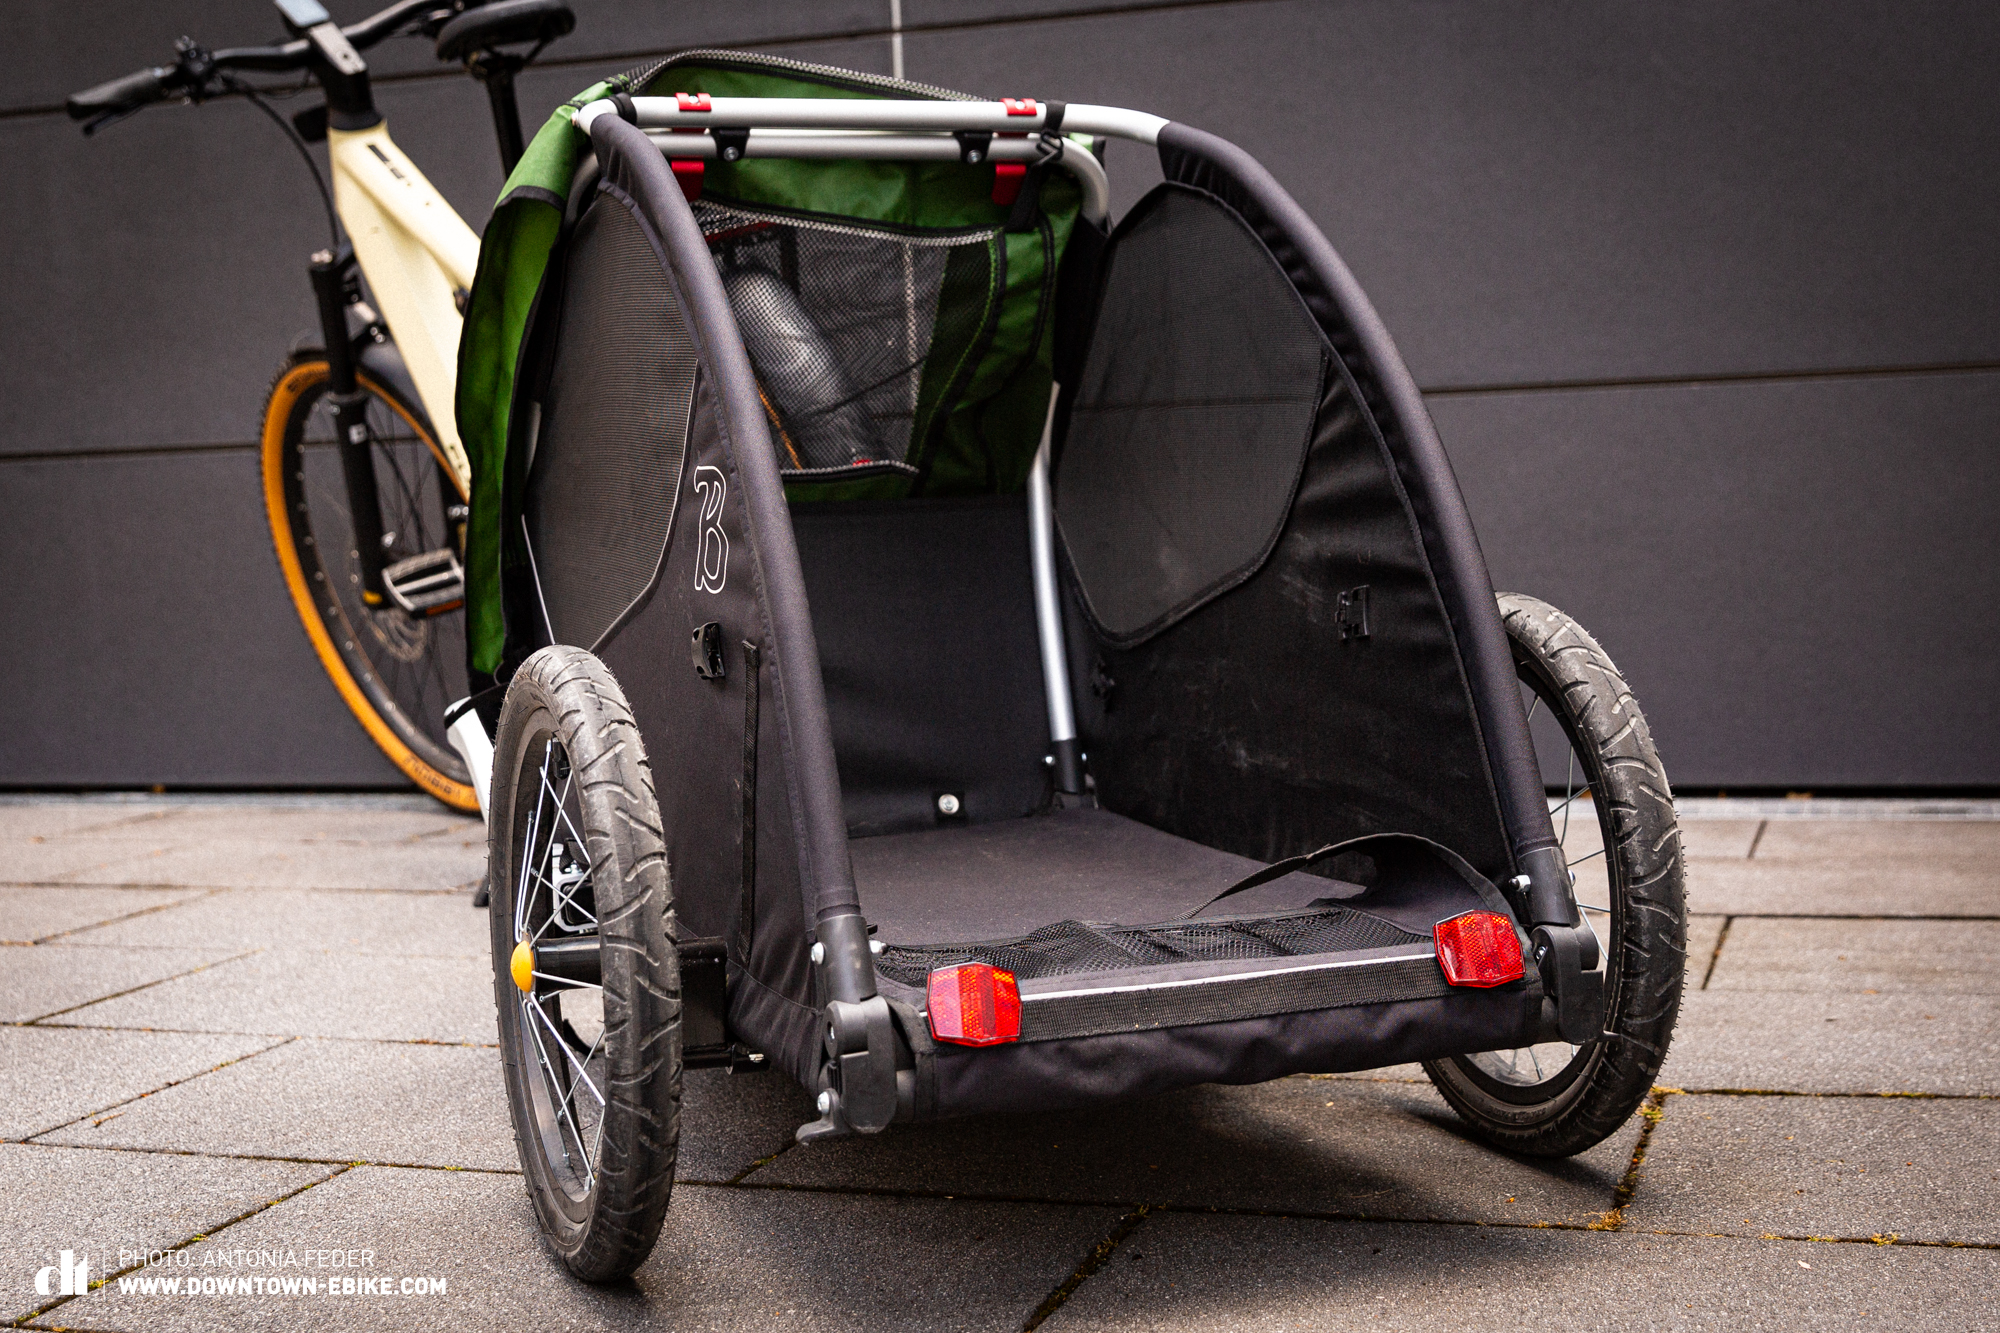 Here you can see the interior of a bicycle dog trailer that is not padded.